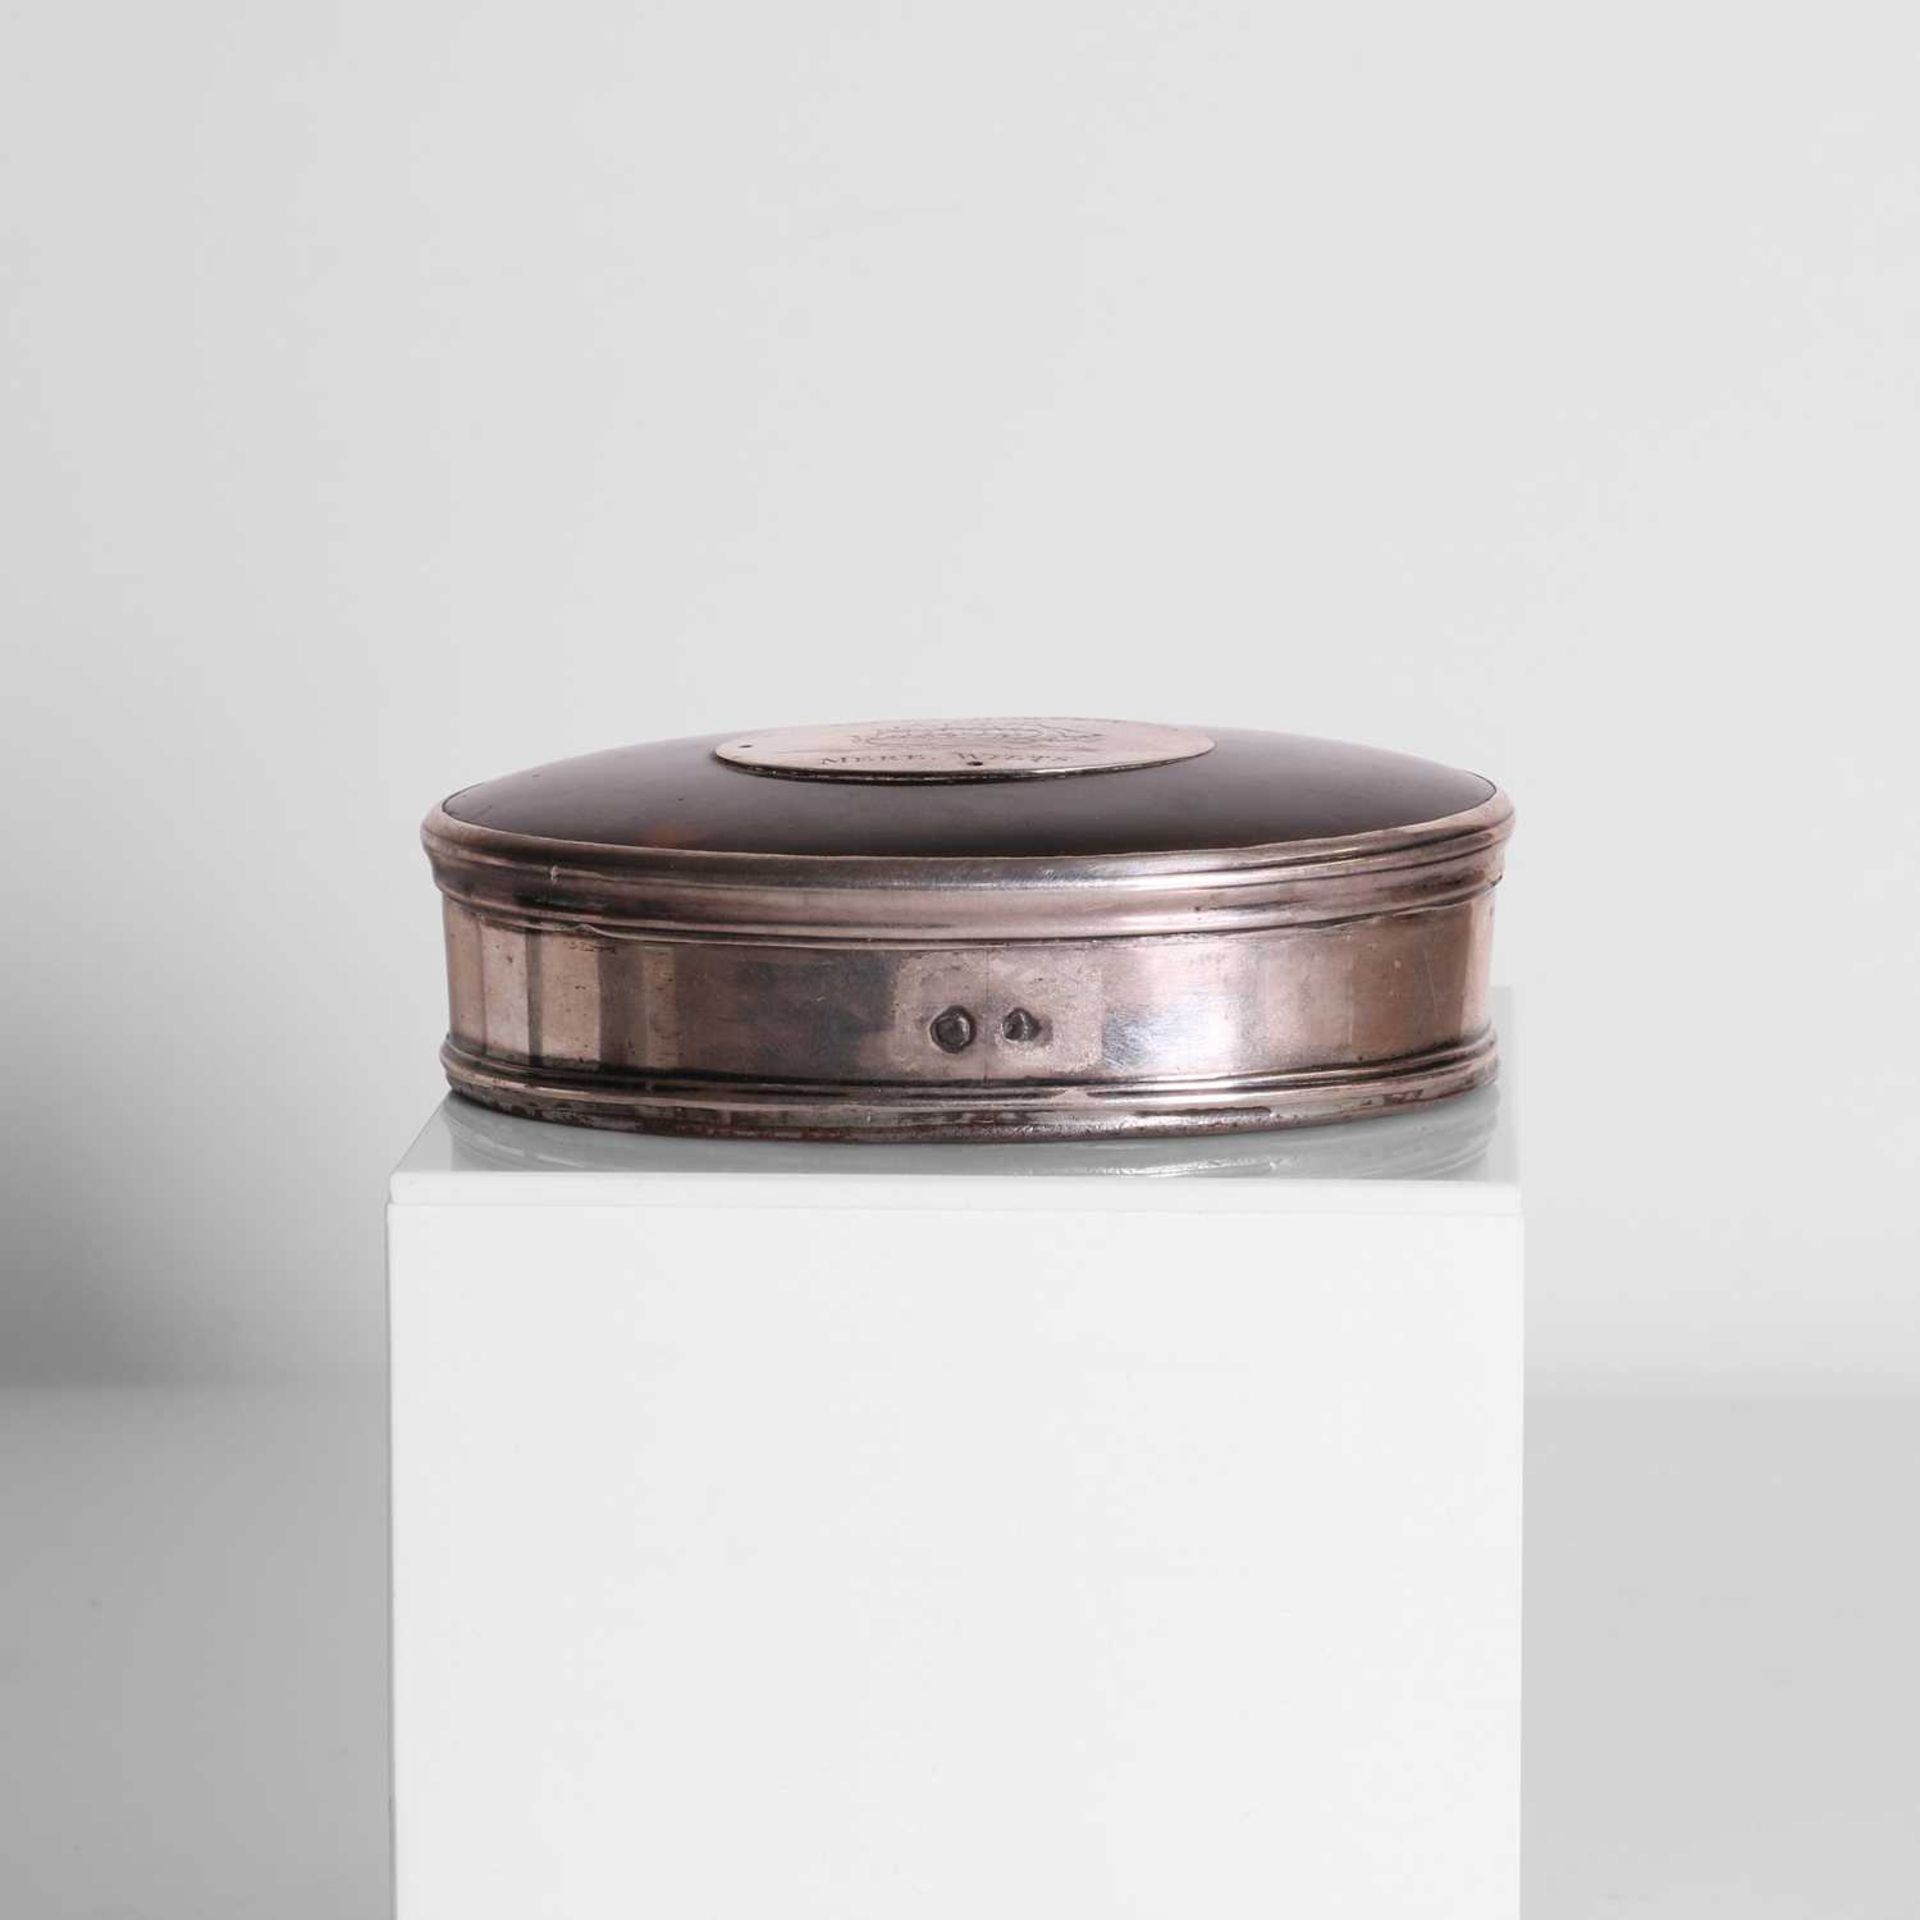 A sea captain's tortoiseshell and silver snuffbox, - Image 3 of 5